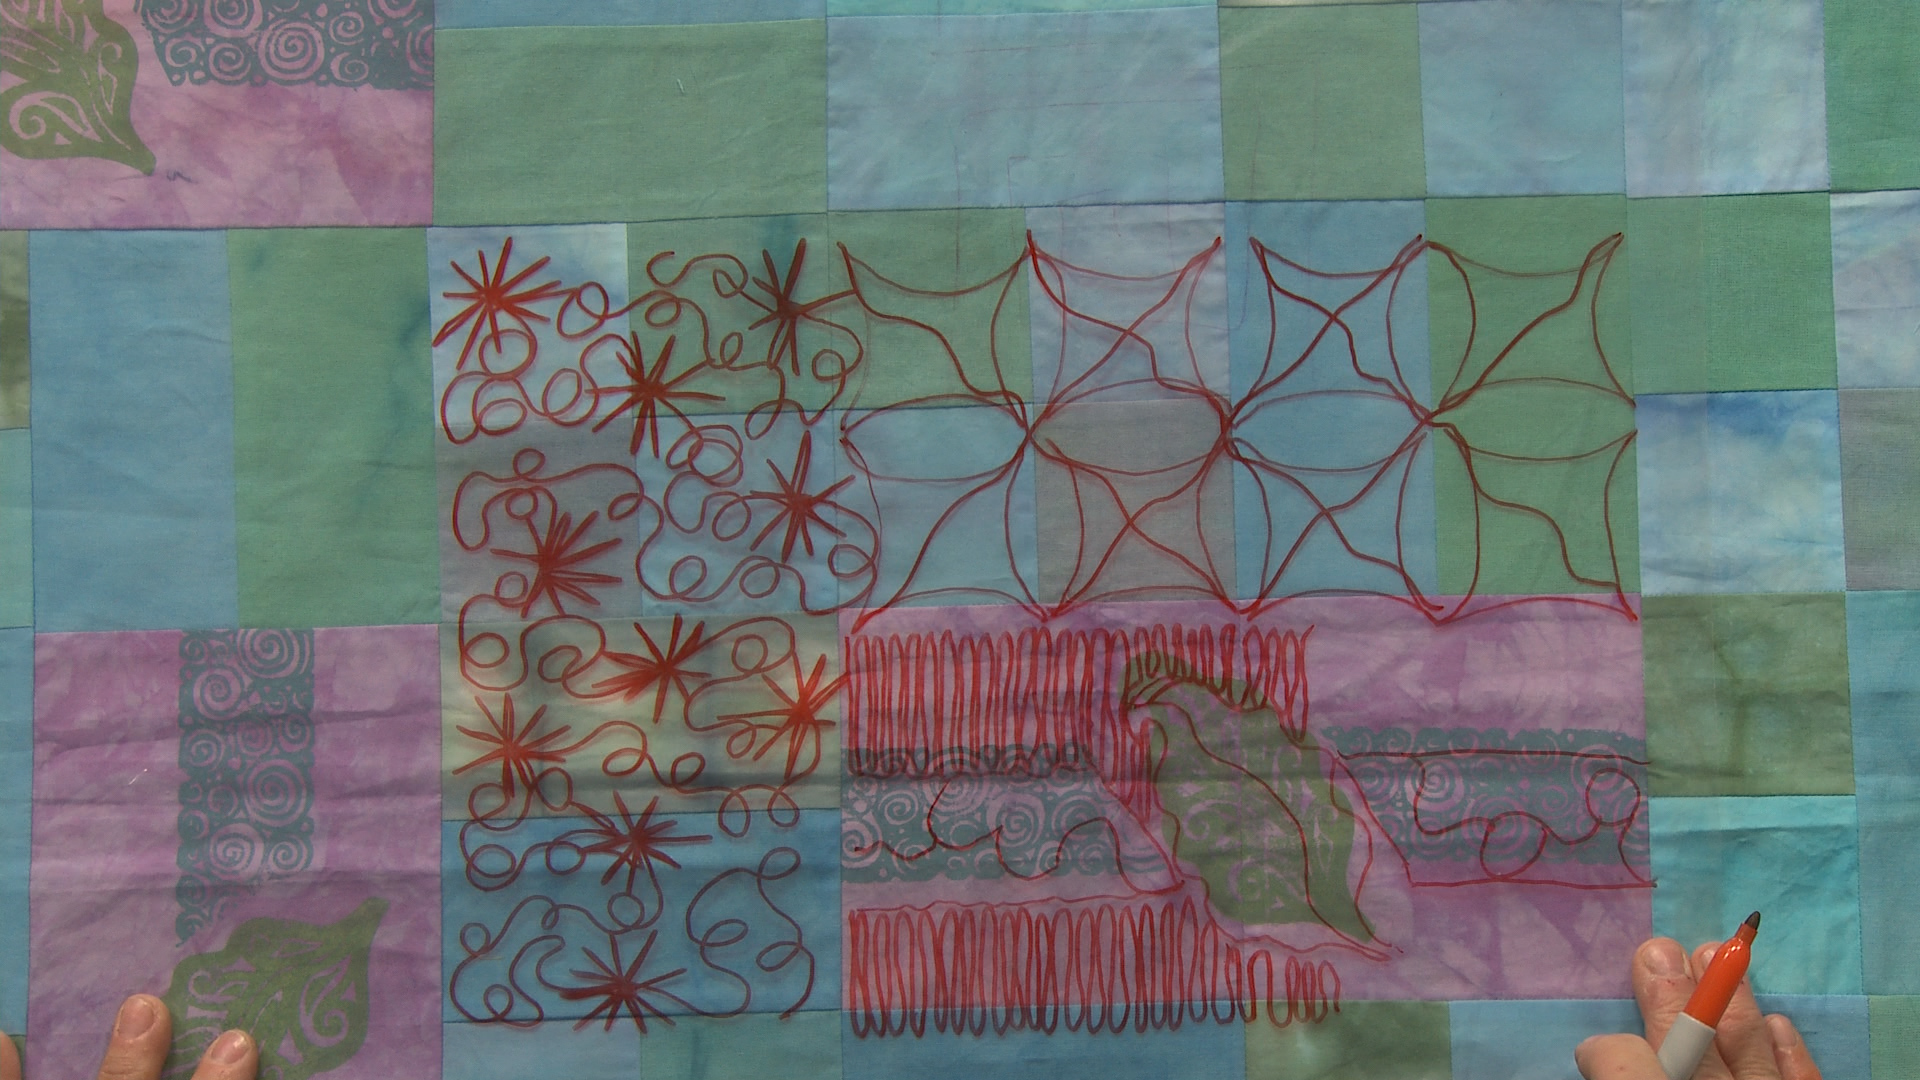 Session 5: Designing the Quilting